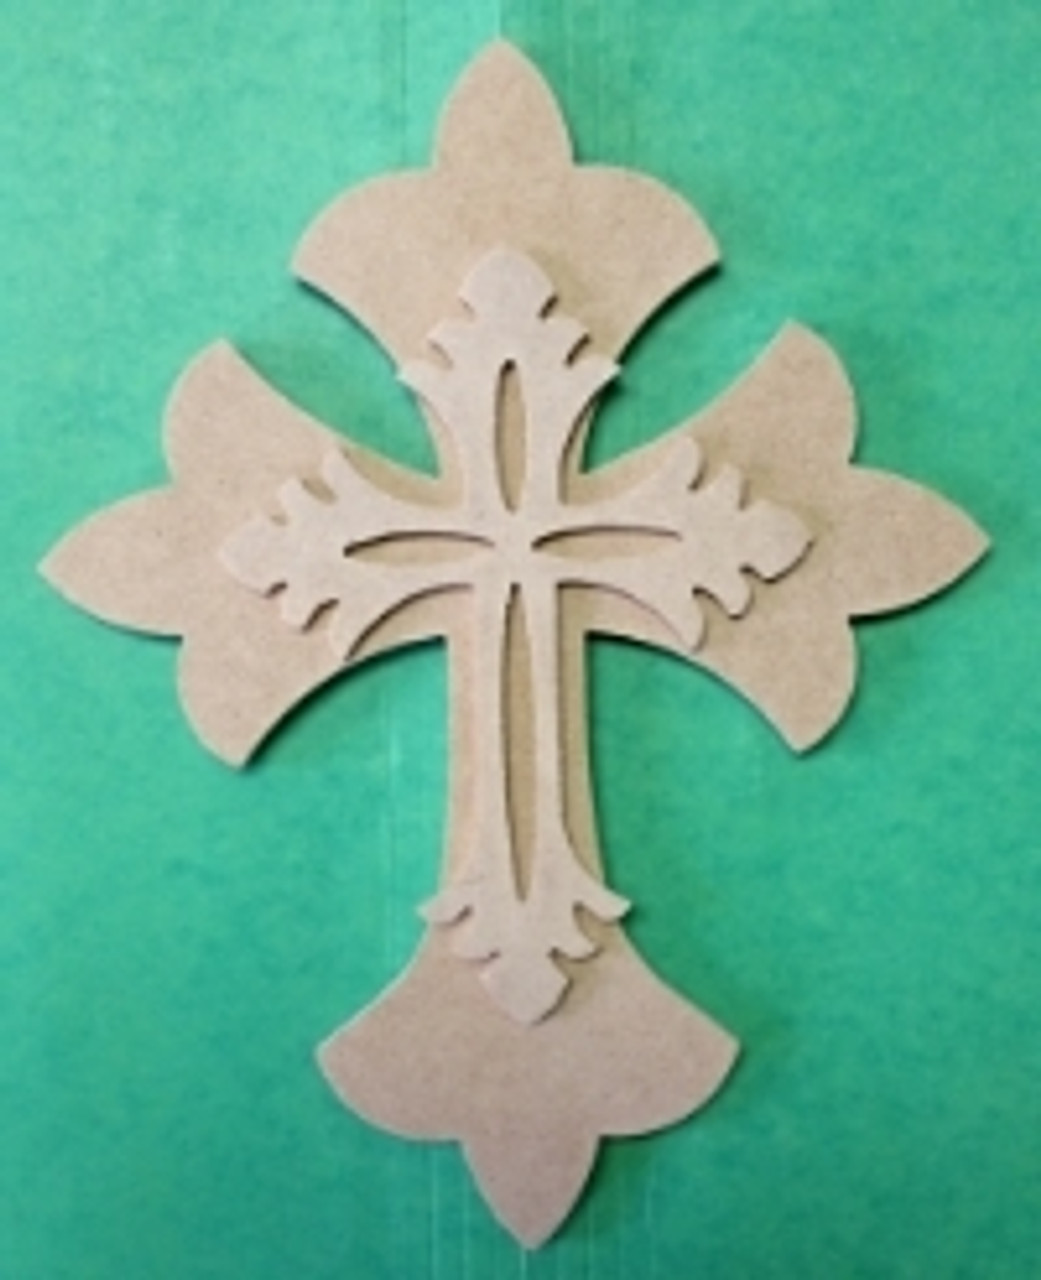 Wood Cross, Wooden Cross for Crafts, Religious Decor, Christian